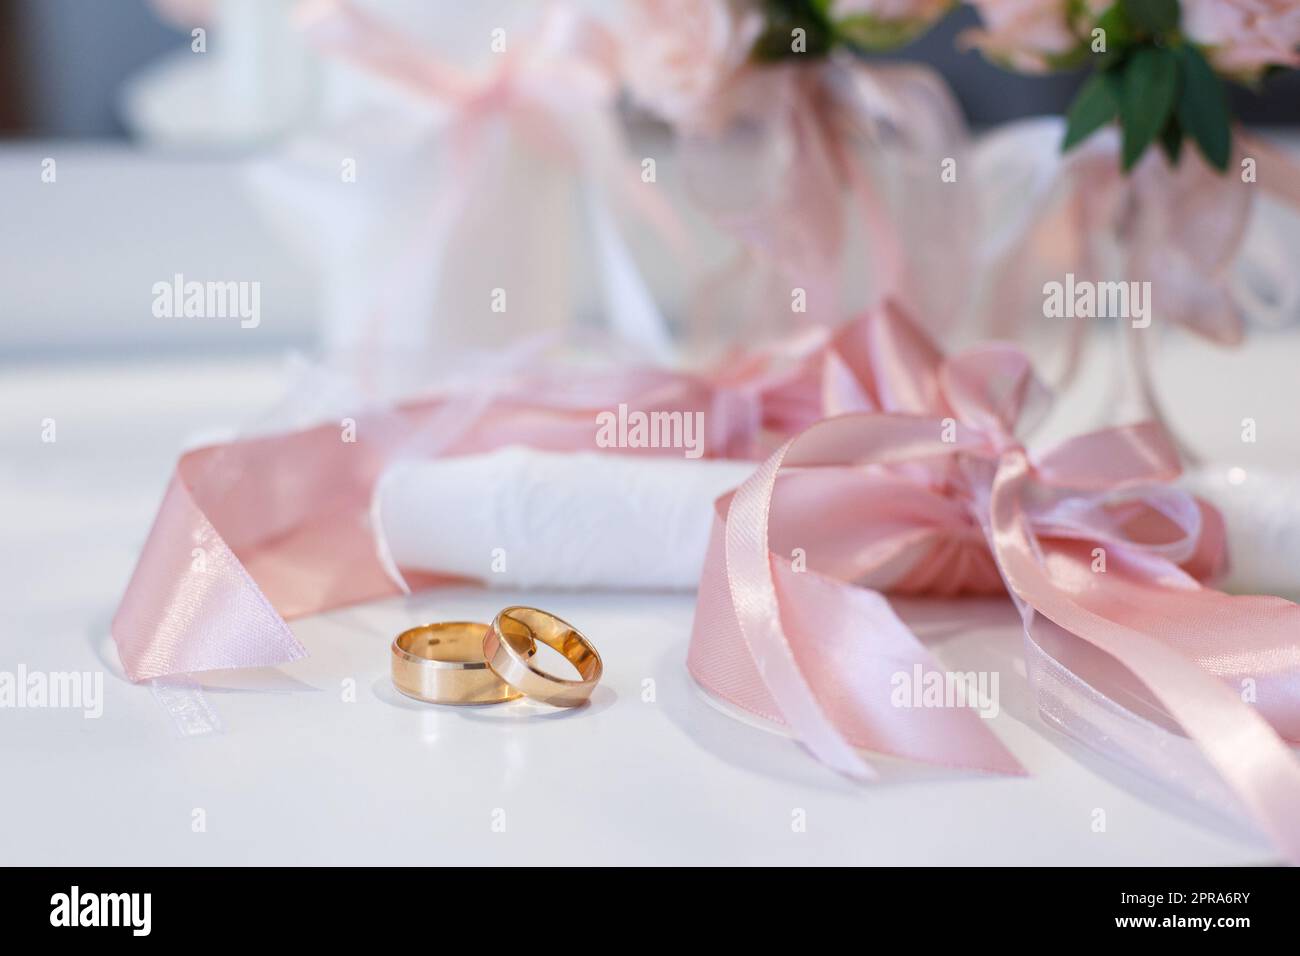 Close up of gold universal wedding rings lying on the table. Stock Photo